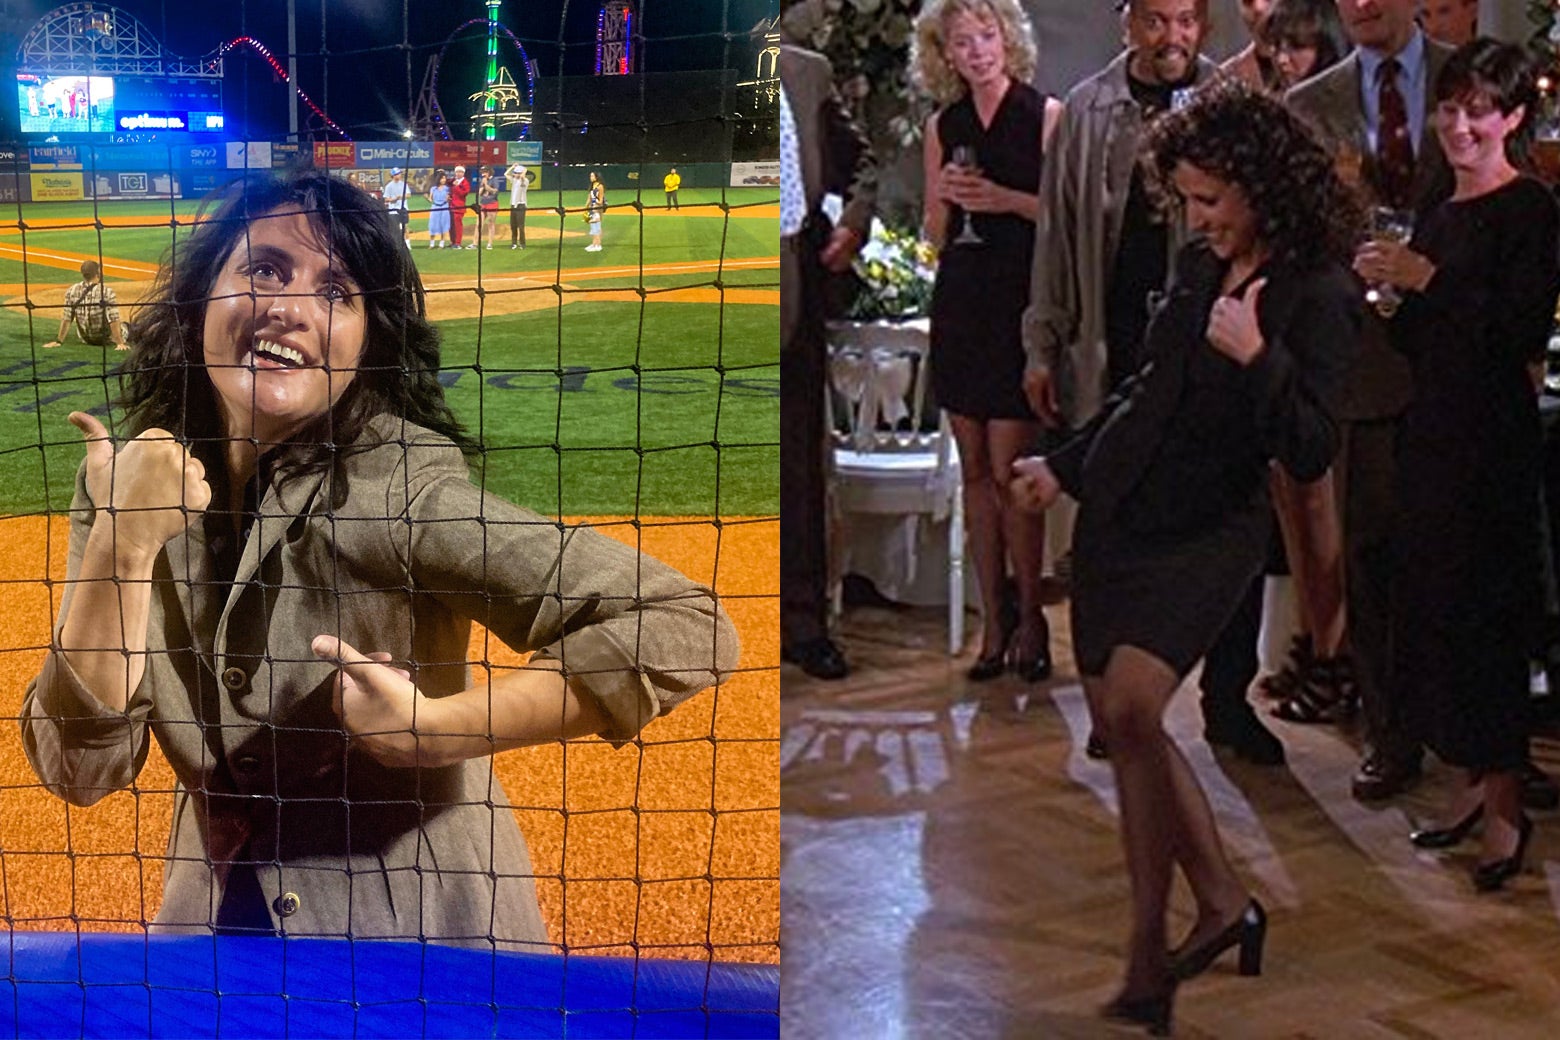 Side-by-side: A woman doing the Elaine dance with the thumbs-up, and Elaine doing the same dance on Seinfeld.